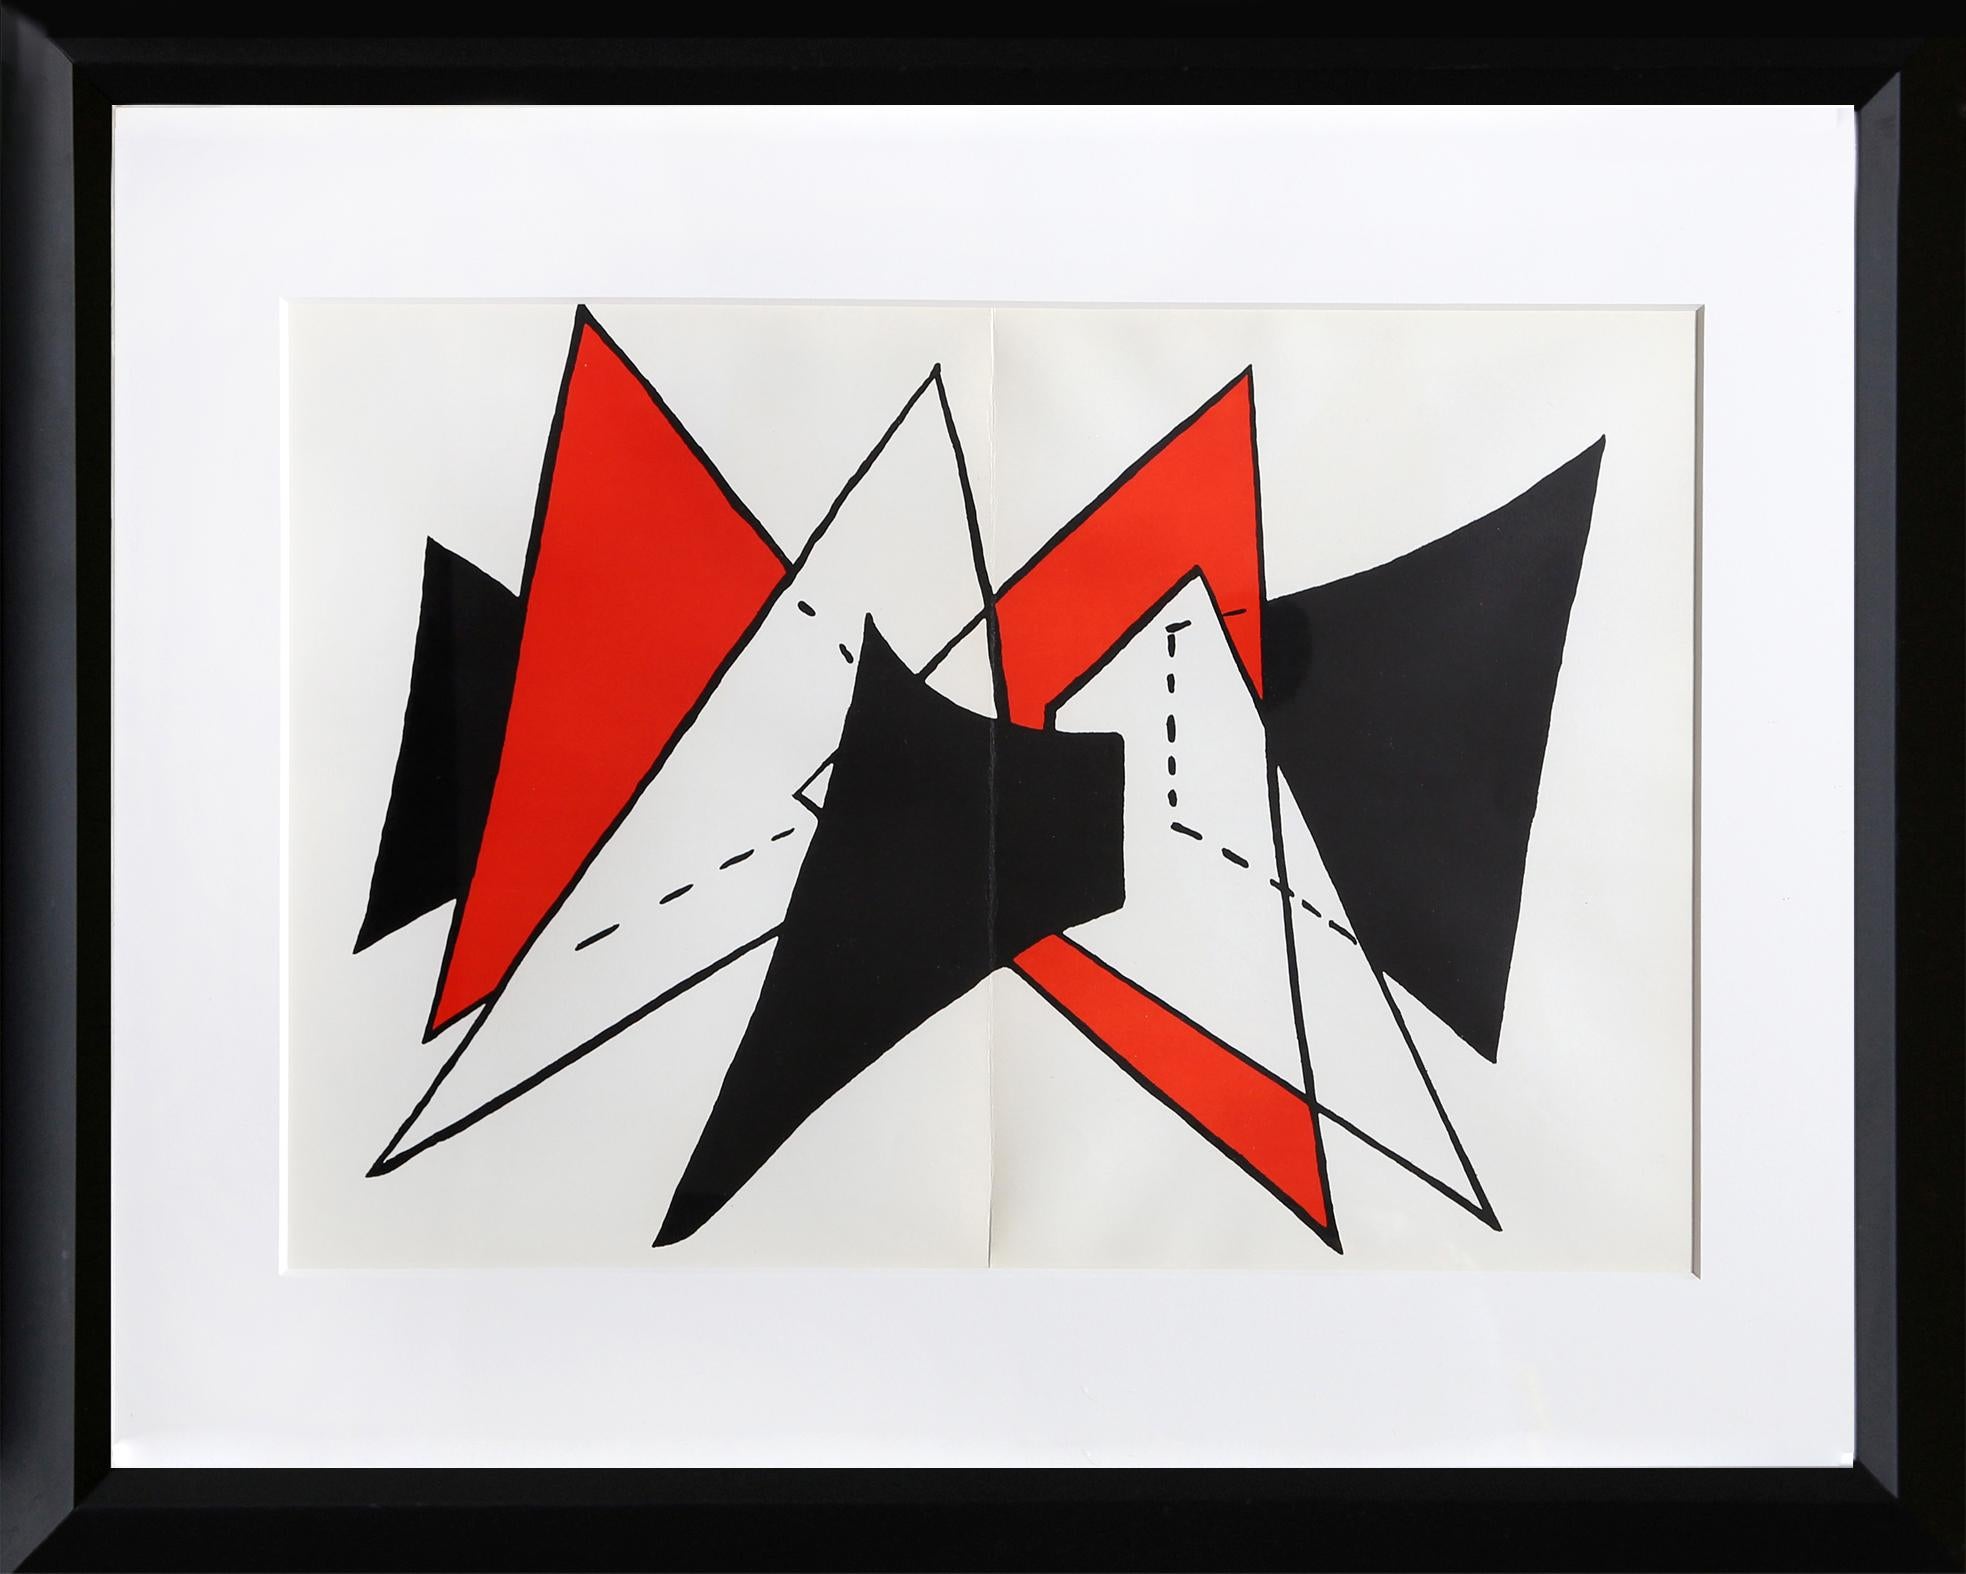 Alexander Calder, American (1898–1976)
Study for Sculpture II from Derriere Le Miroir
Date: 1975
Lithograph
Size: 15 in. x 22 in. (38.1 cm x 55.88 cm)
Frame Size: 23 x 30 inches
Printer: Maeght, Paris
Publisher: Maeght, Paris